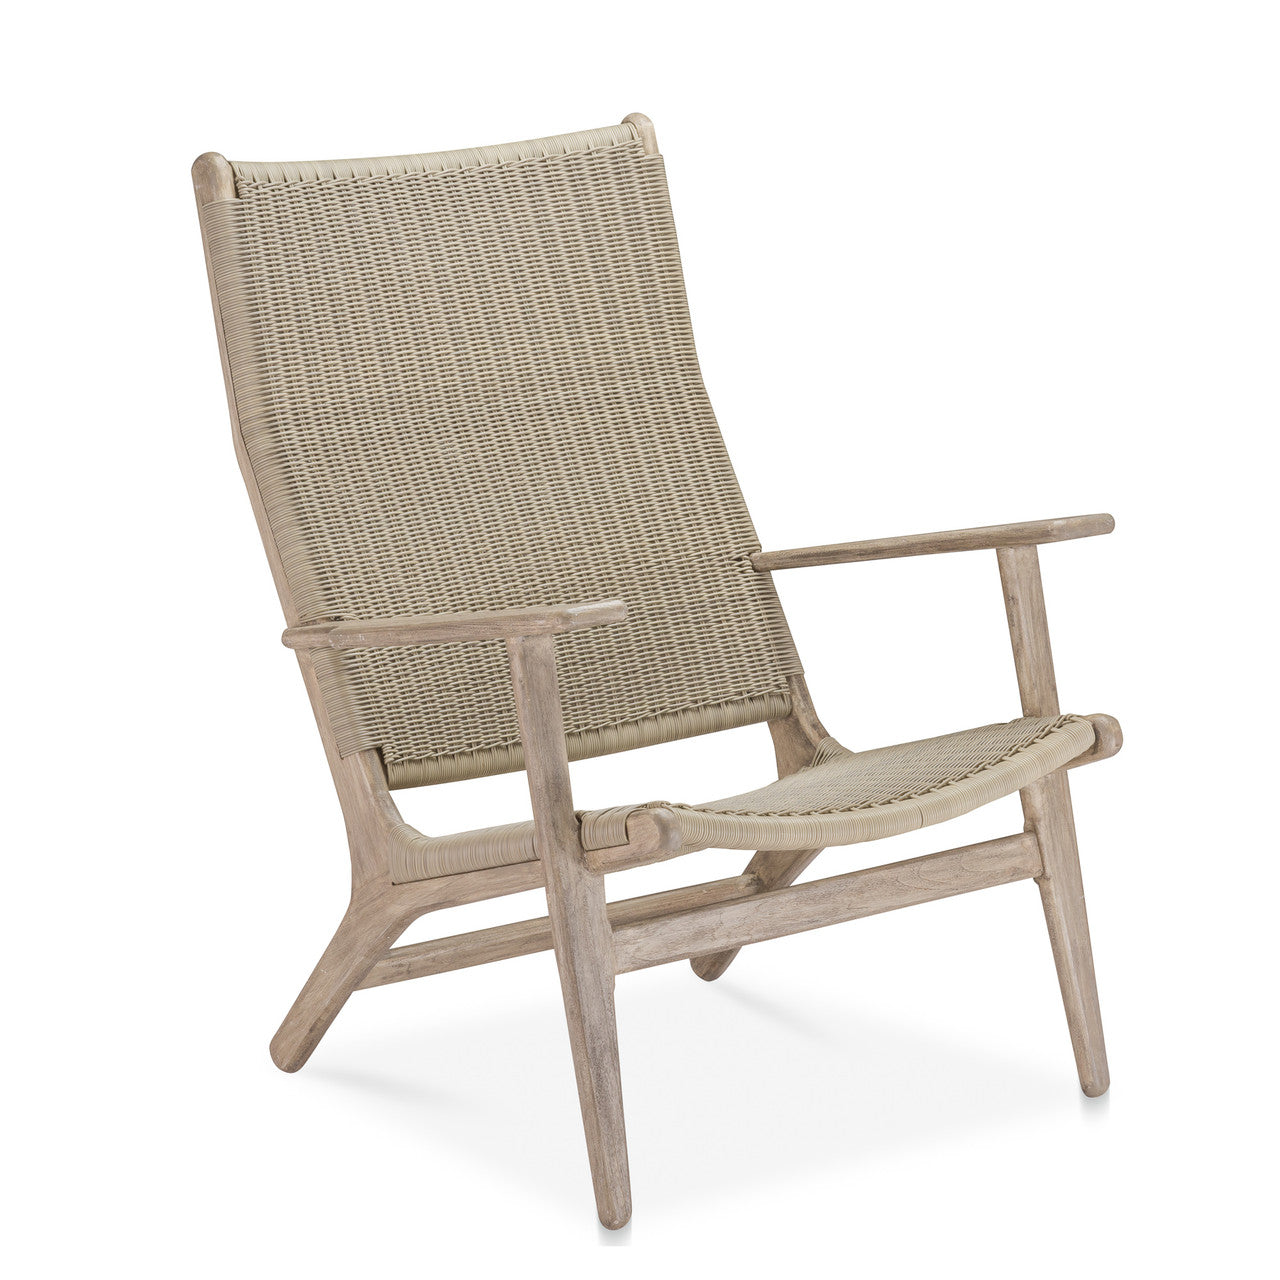 CO9 Design - Dover Adirondack Chair | Gray, Natural in Navy and Brown Wicker